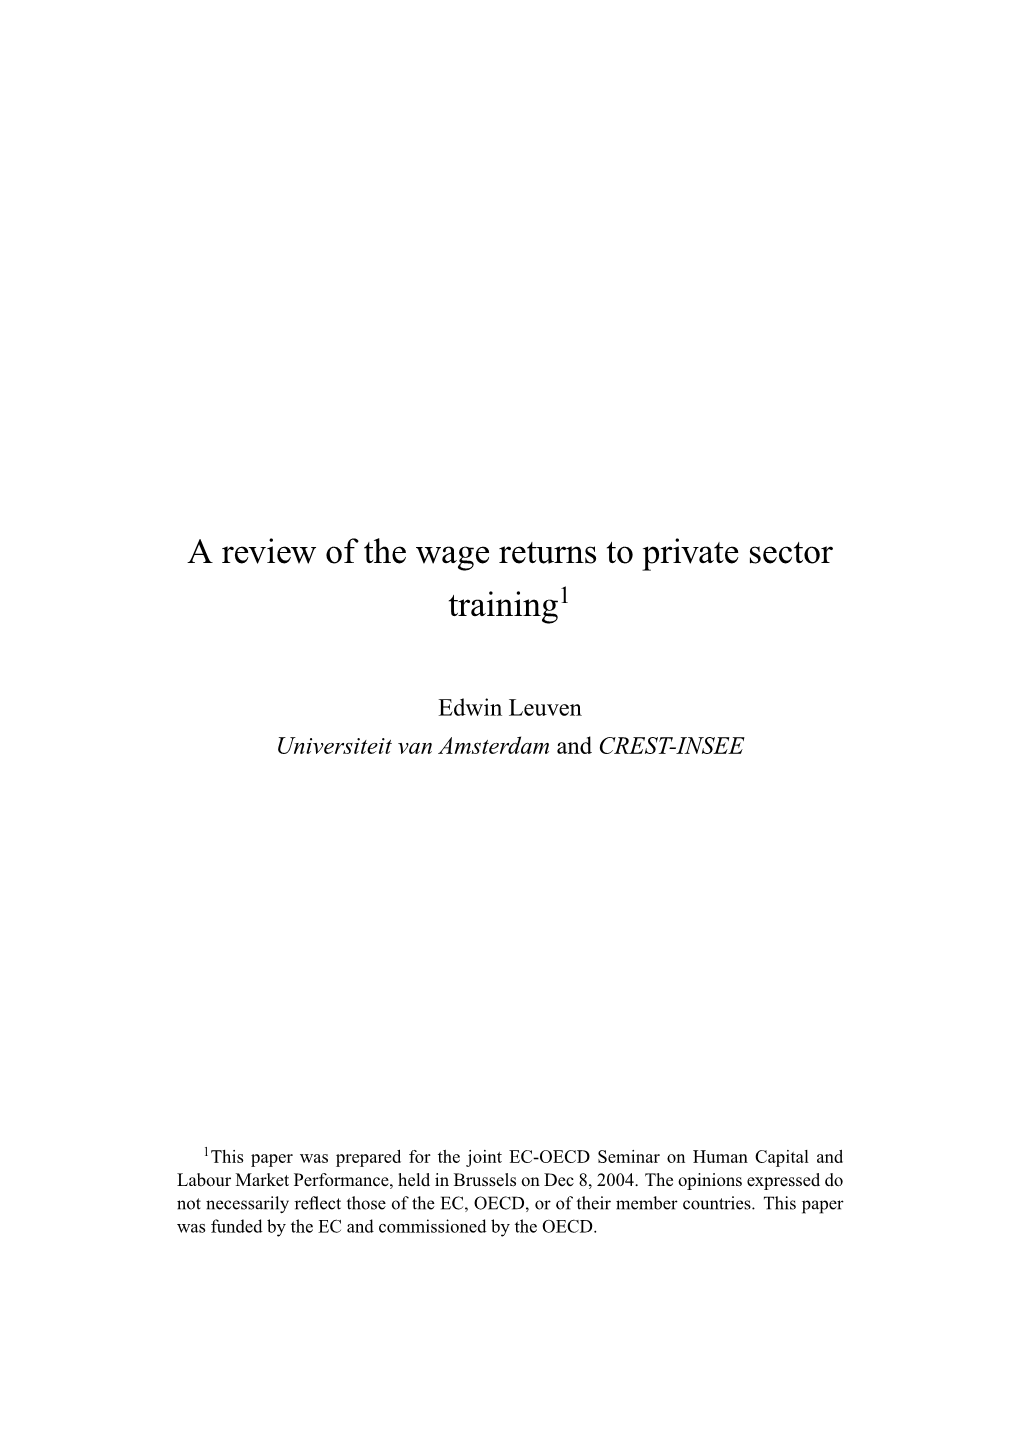 A Review of the Wage Returns to Private Sector Training1